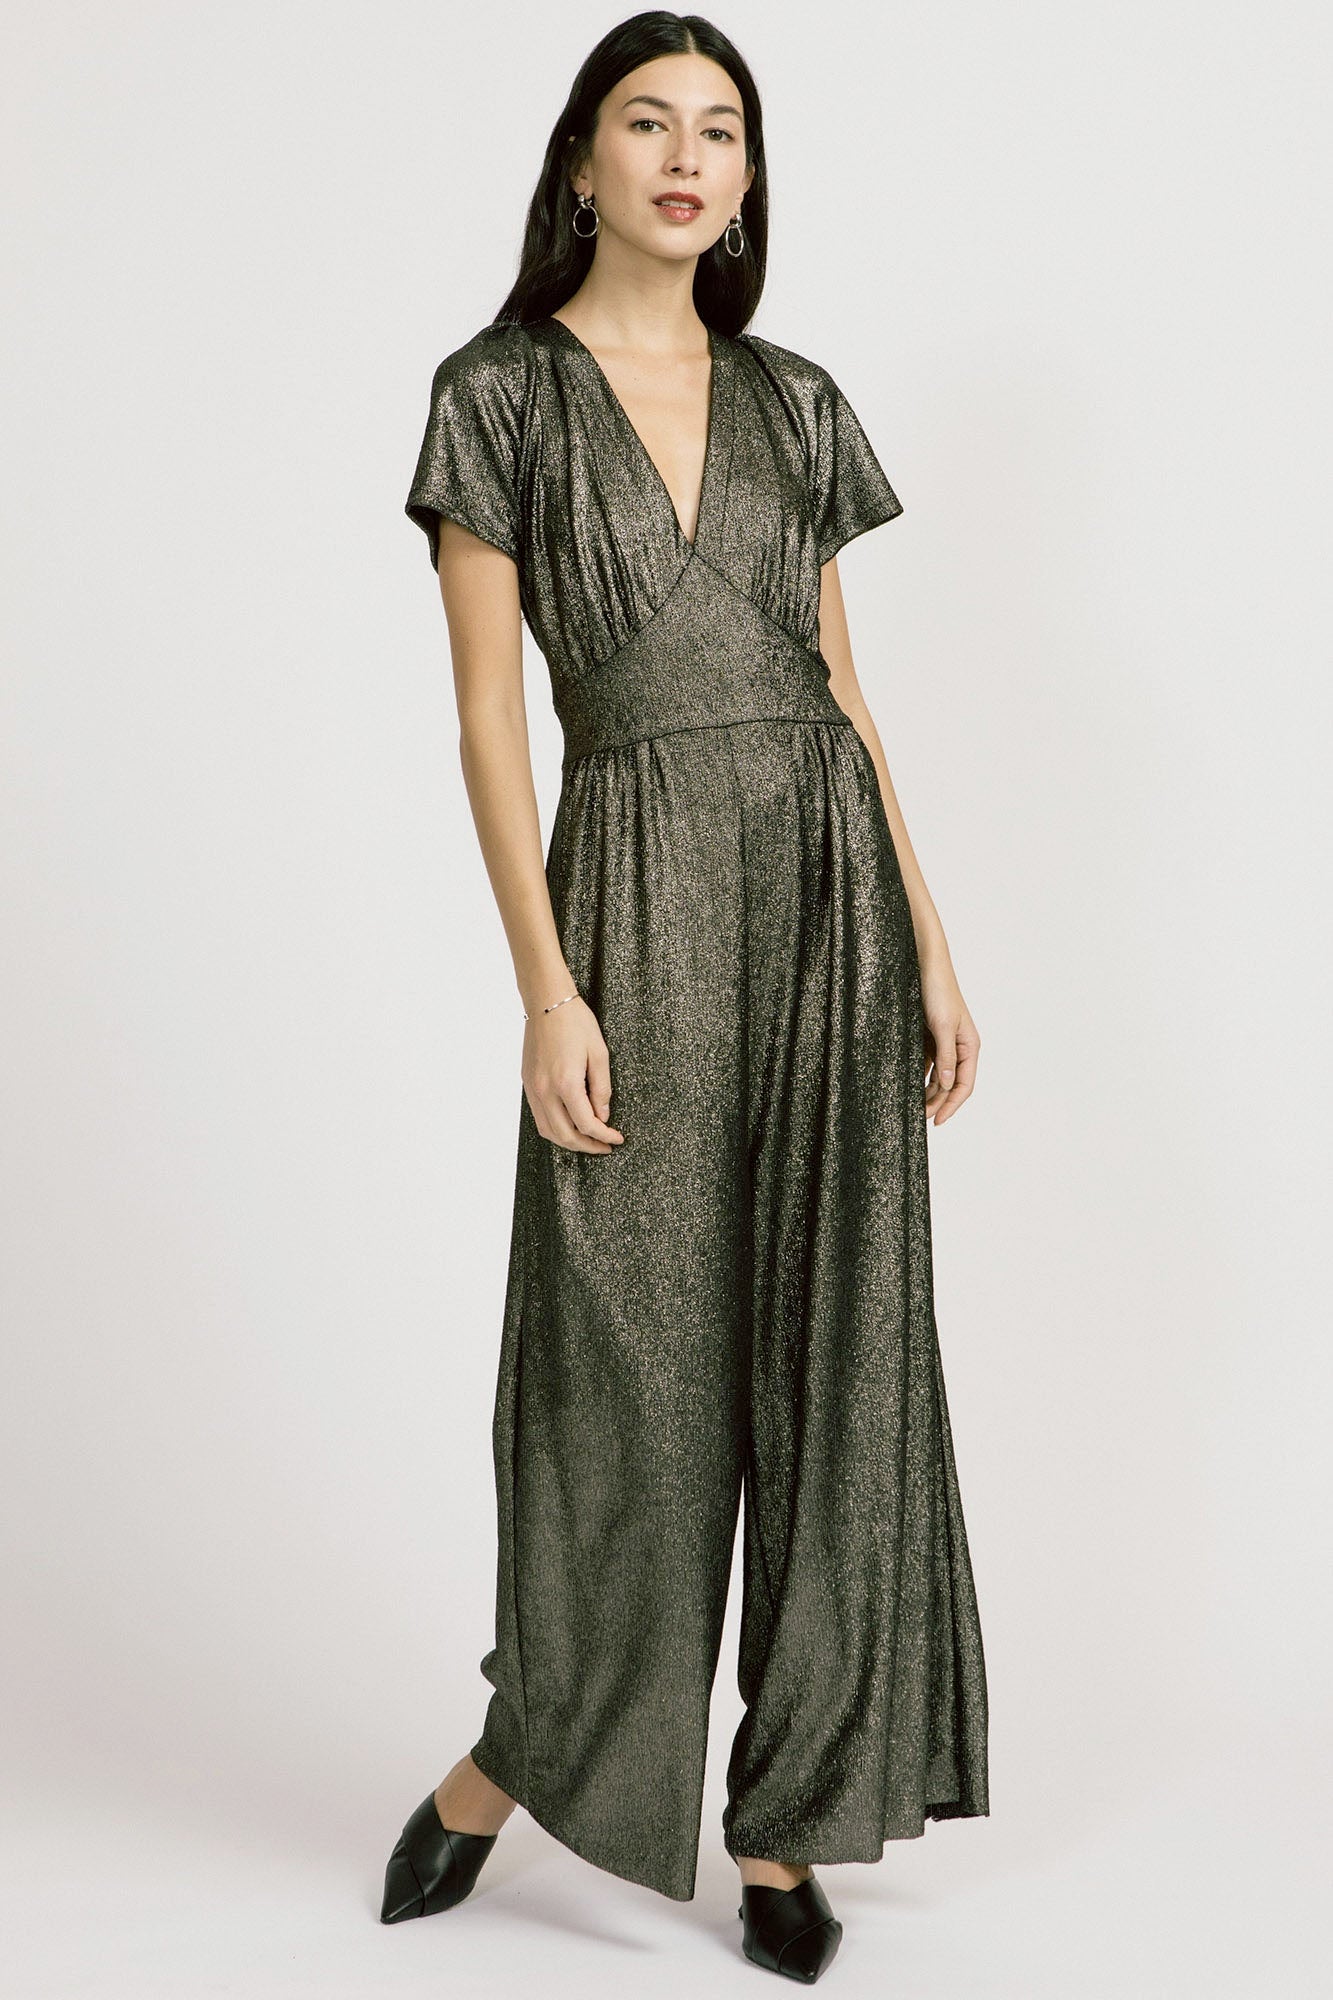 Spirited Jumpsuit by Allison Wonderland, Metallic, short sleeves, deep V-neck, gathers under bust, fitted waistband, wide legs, front pleats, pockets, sizes 2-12, made in Vancouver